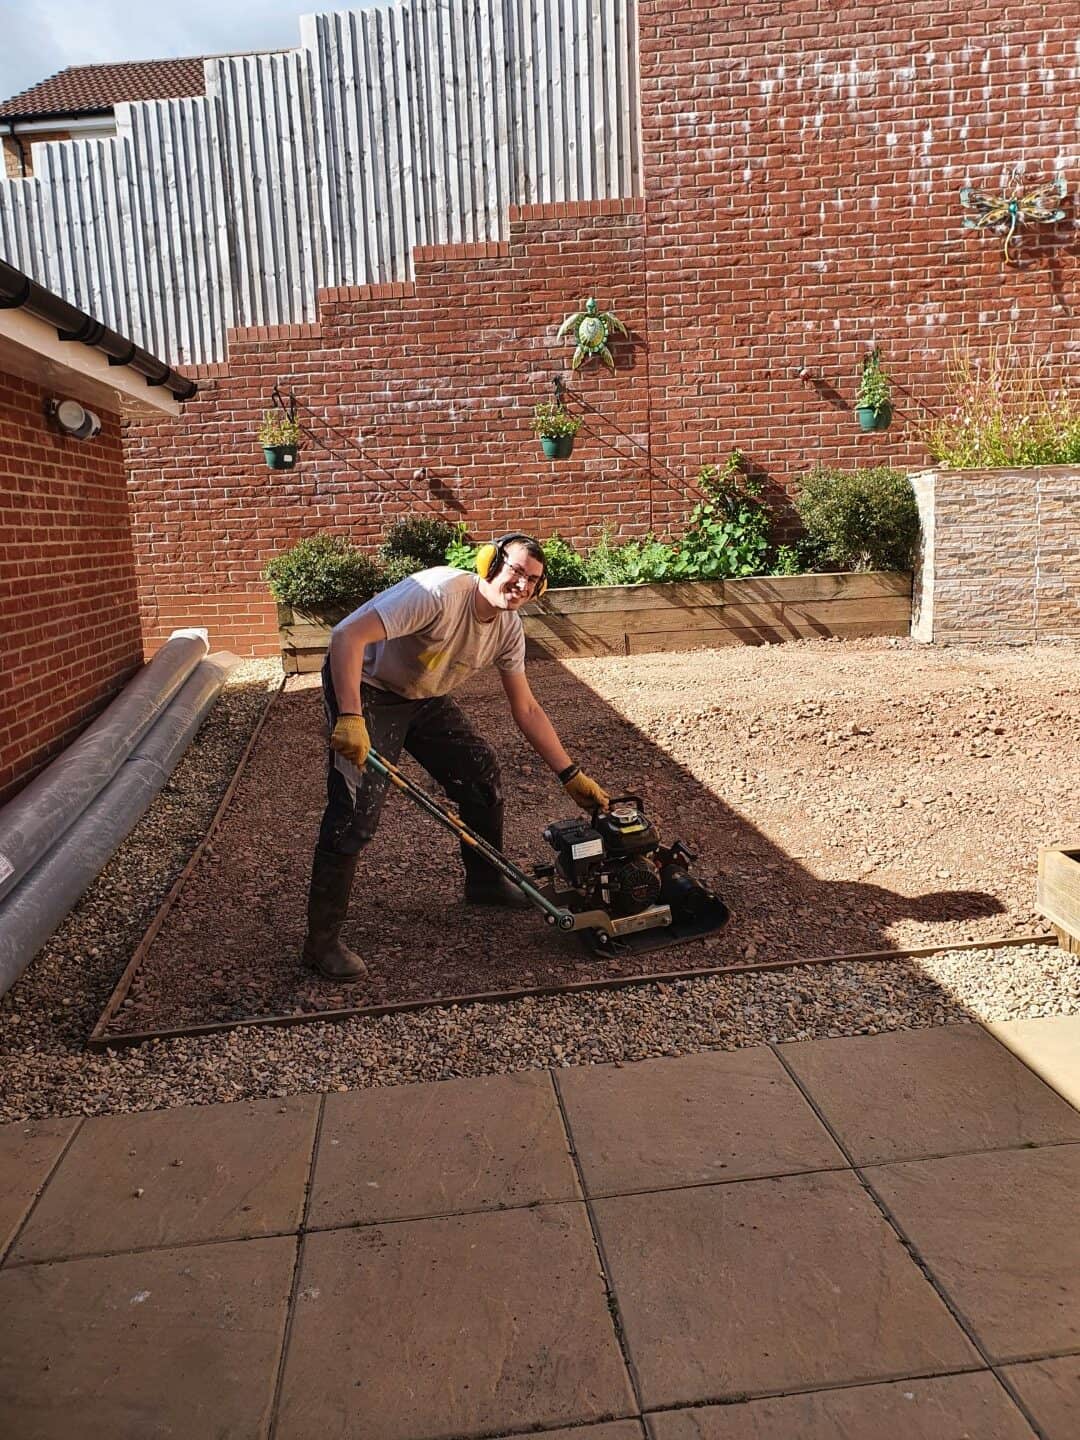 Me - Tristan - using a plate compactor - wacker plate - for artificial grass project